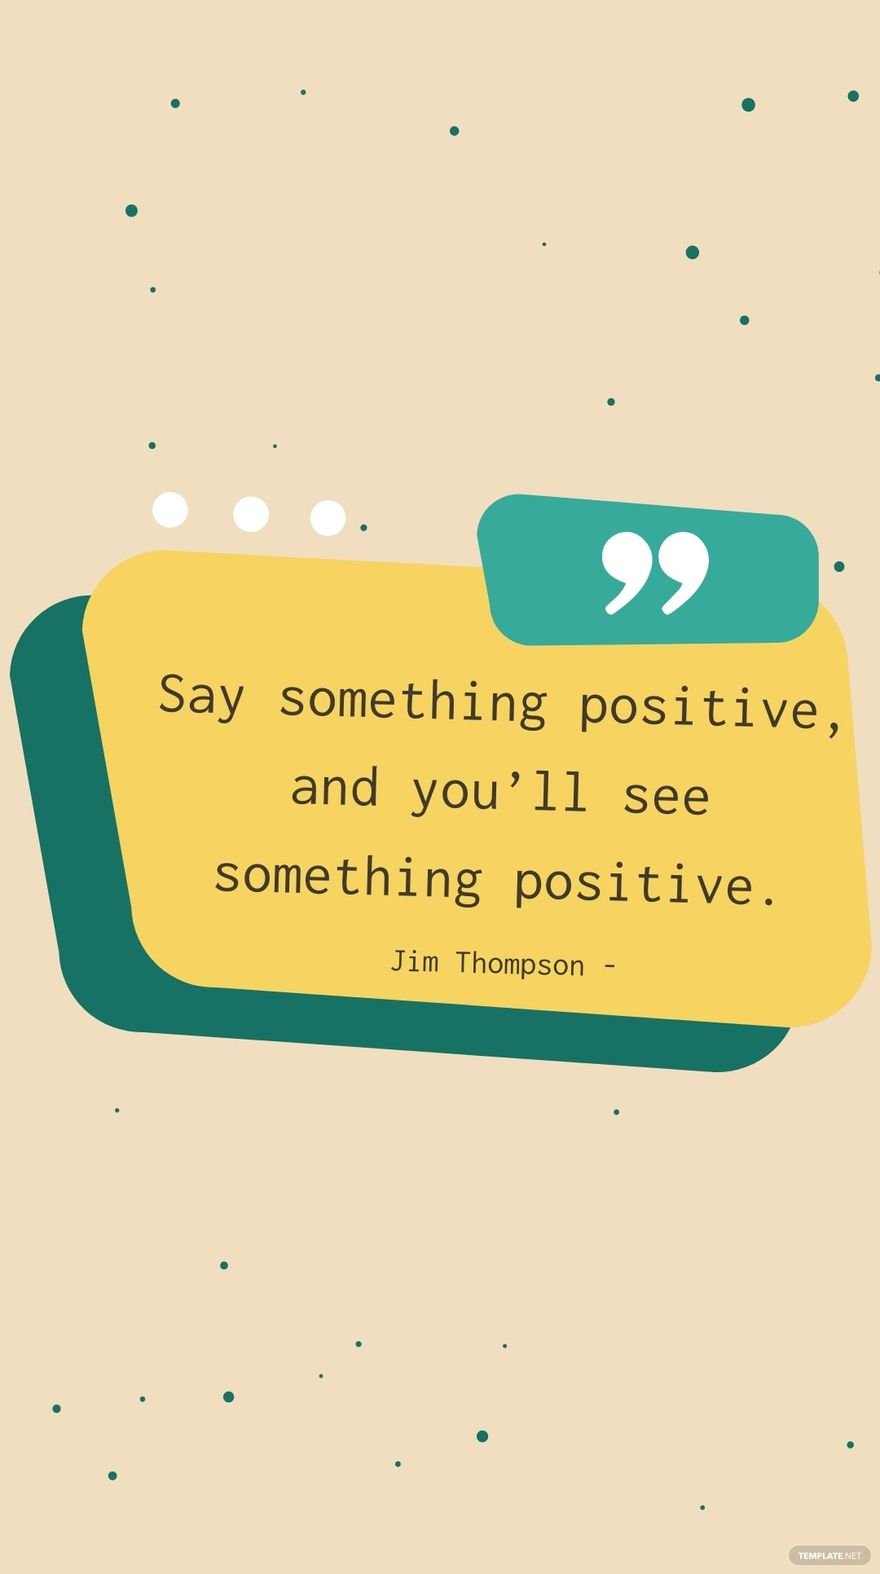 Jim Thompson - Say something positive, and you’ll see something positive.